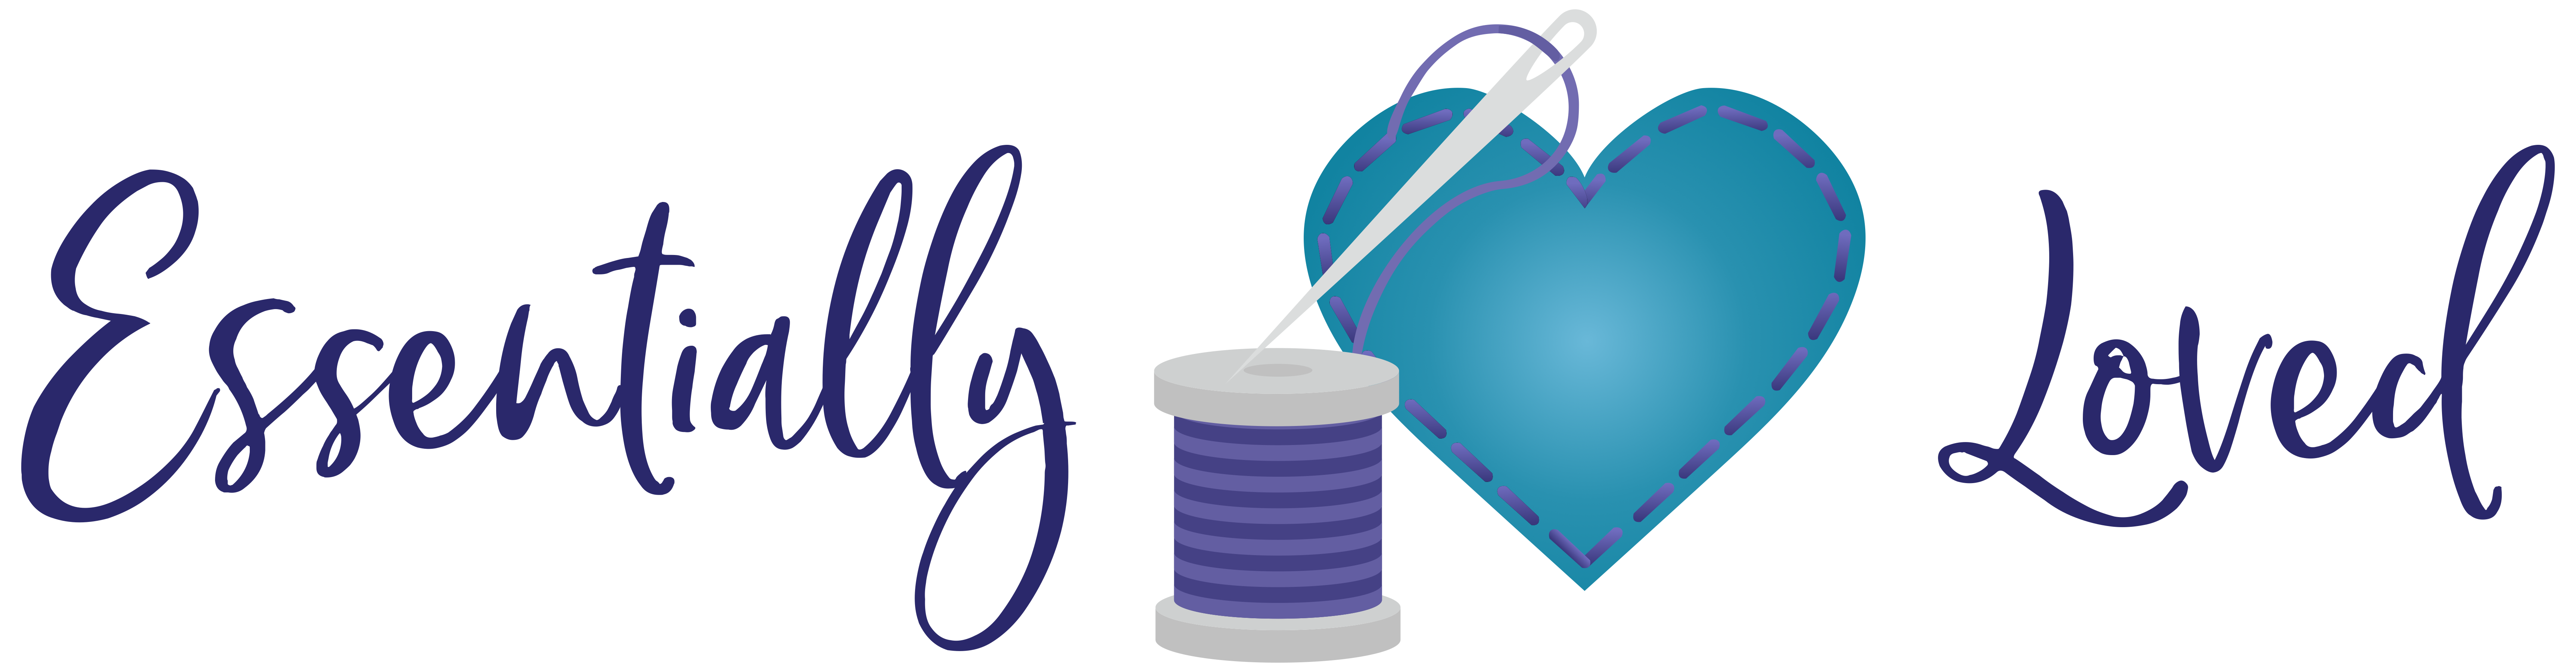 essentially loved logo with stitched teal heart and variegated purple thread spool with needle